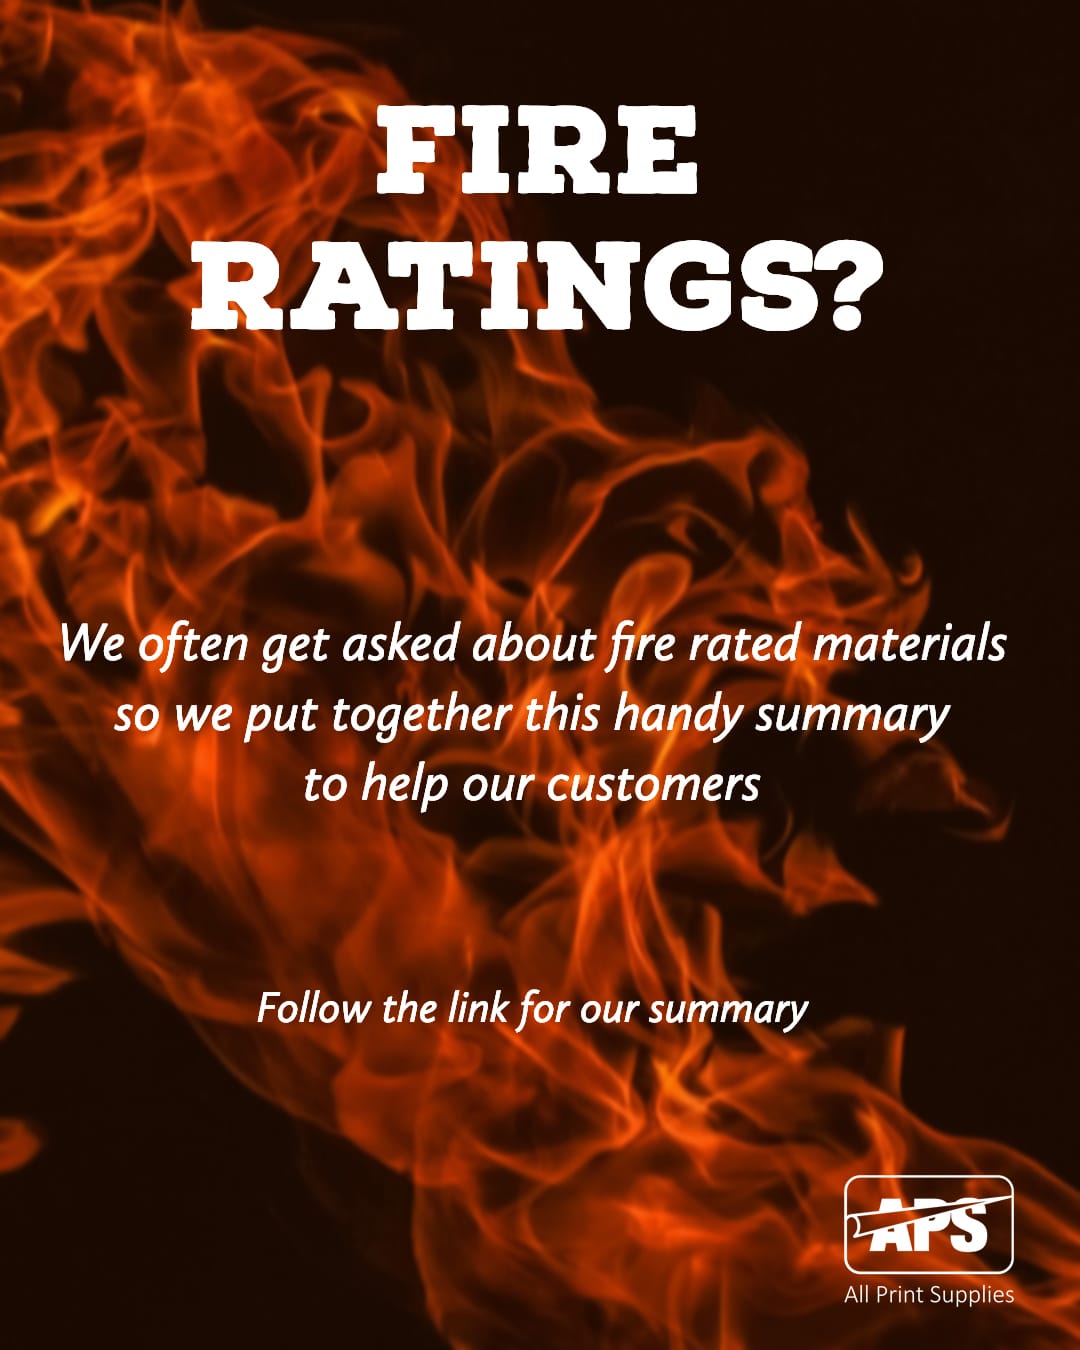 Fire Ratings for Graphics Media? Picture of flames shooting upwards on a black background with text: " we often get asked about Fire rated materials... here is a handy summary to help our customers".